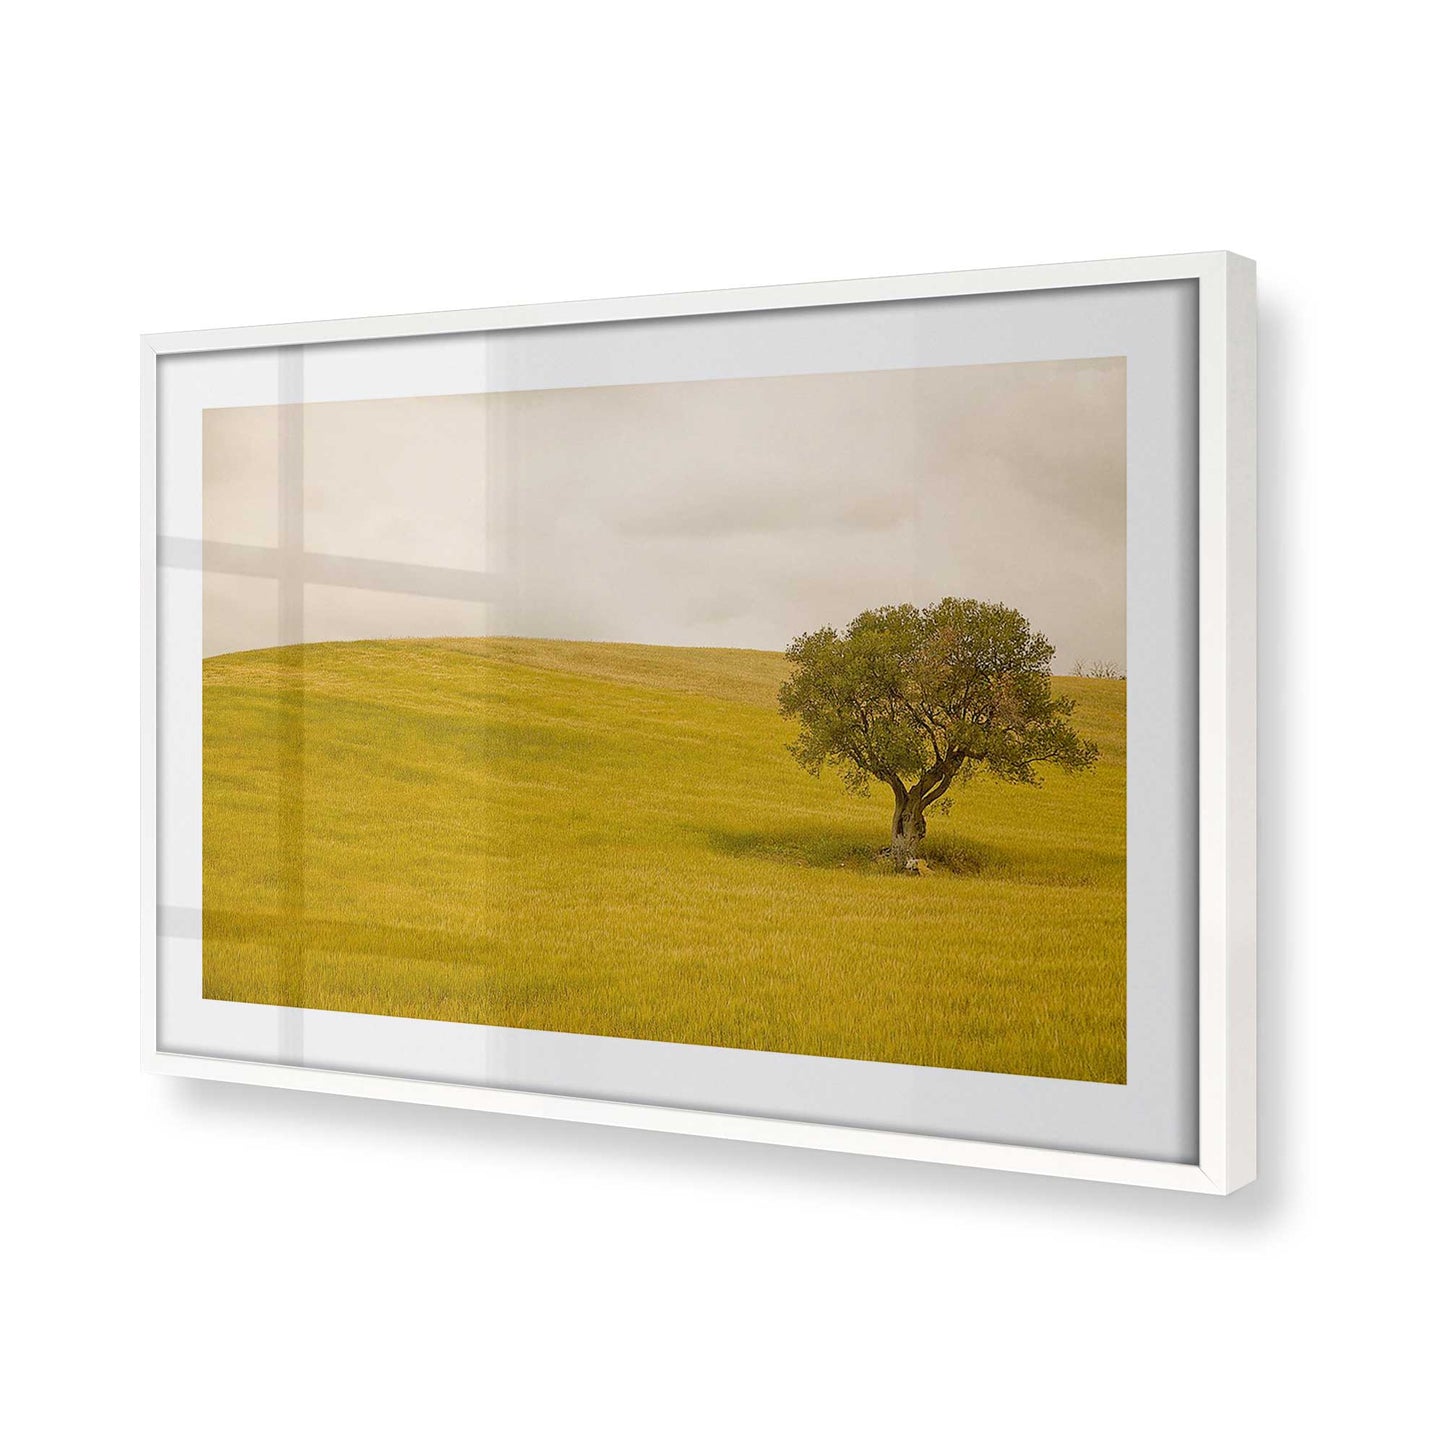 [Color:Opaque White], Picture of art in a Opaque White frame at an angle